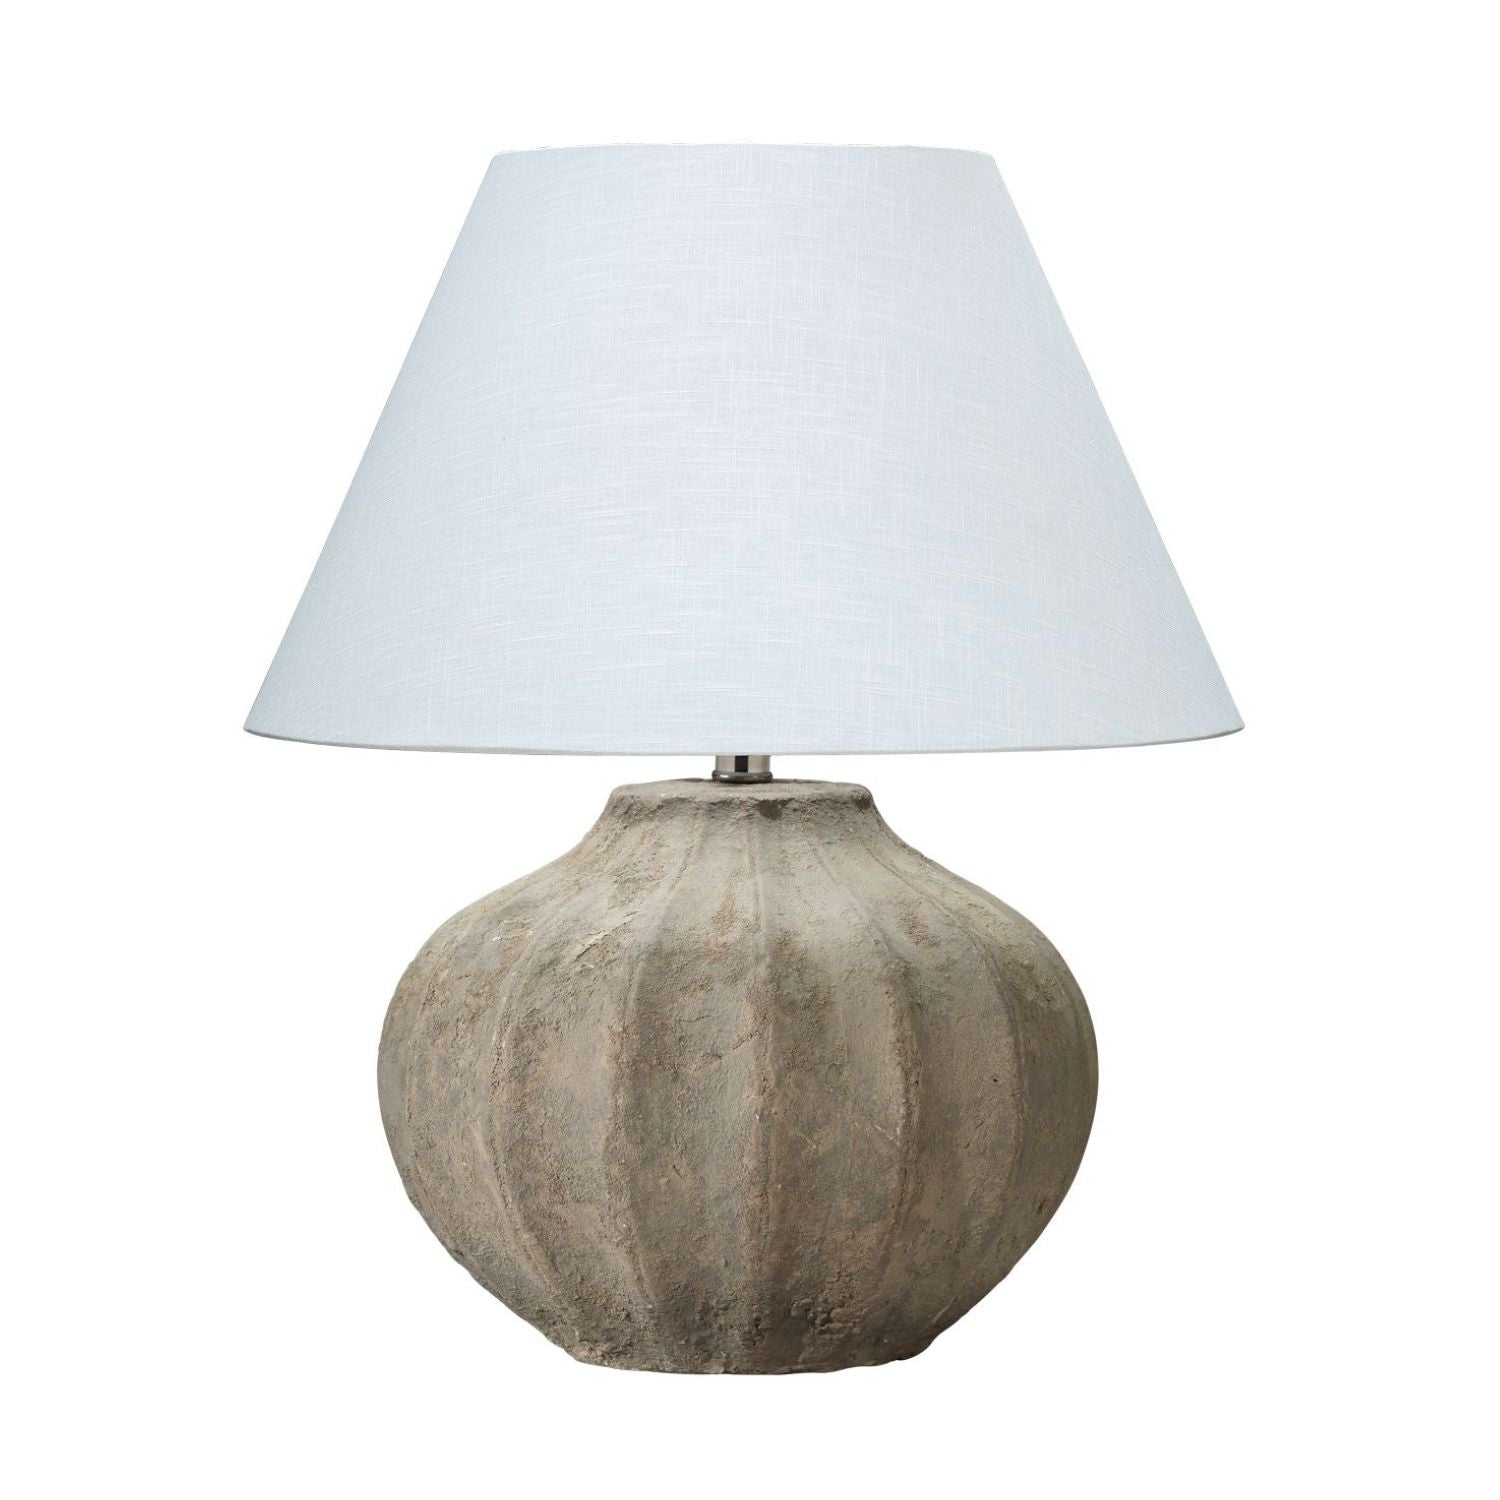 Clamshell Table Lamp